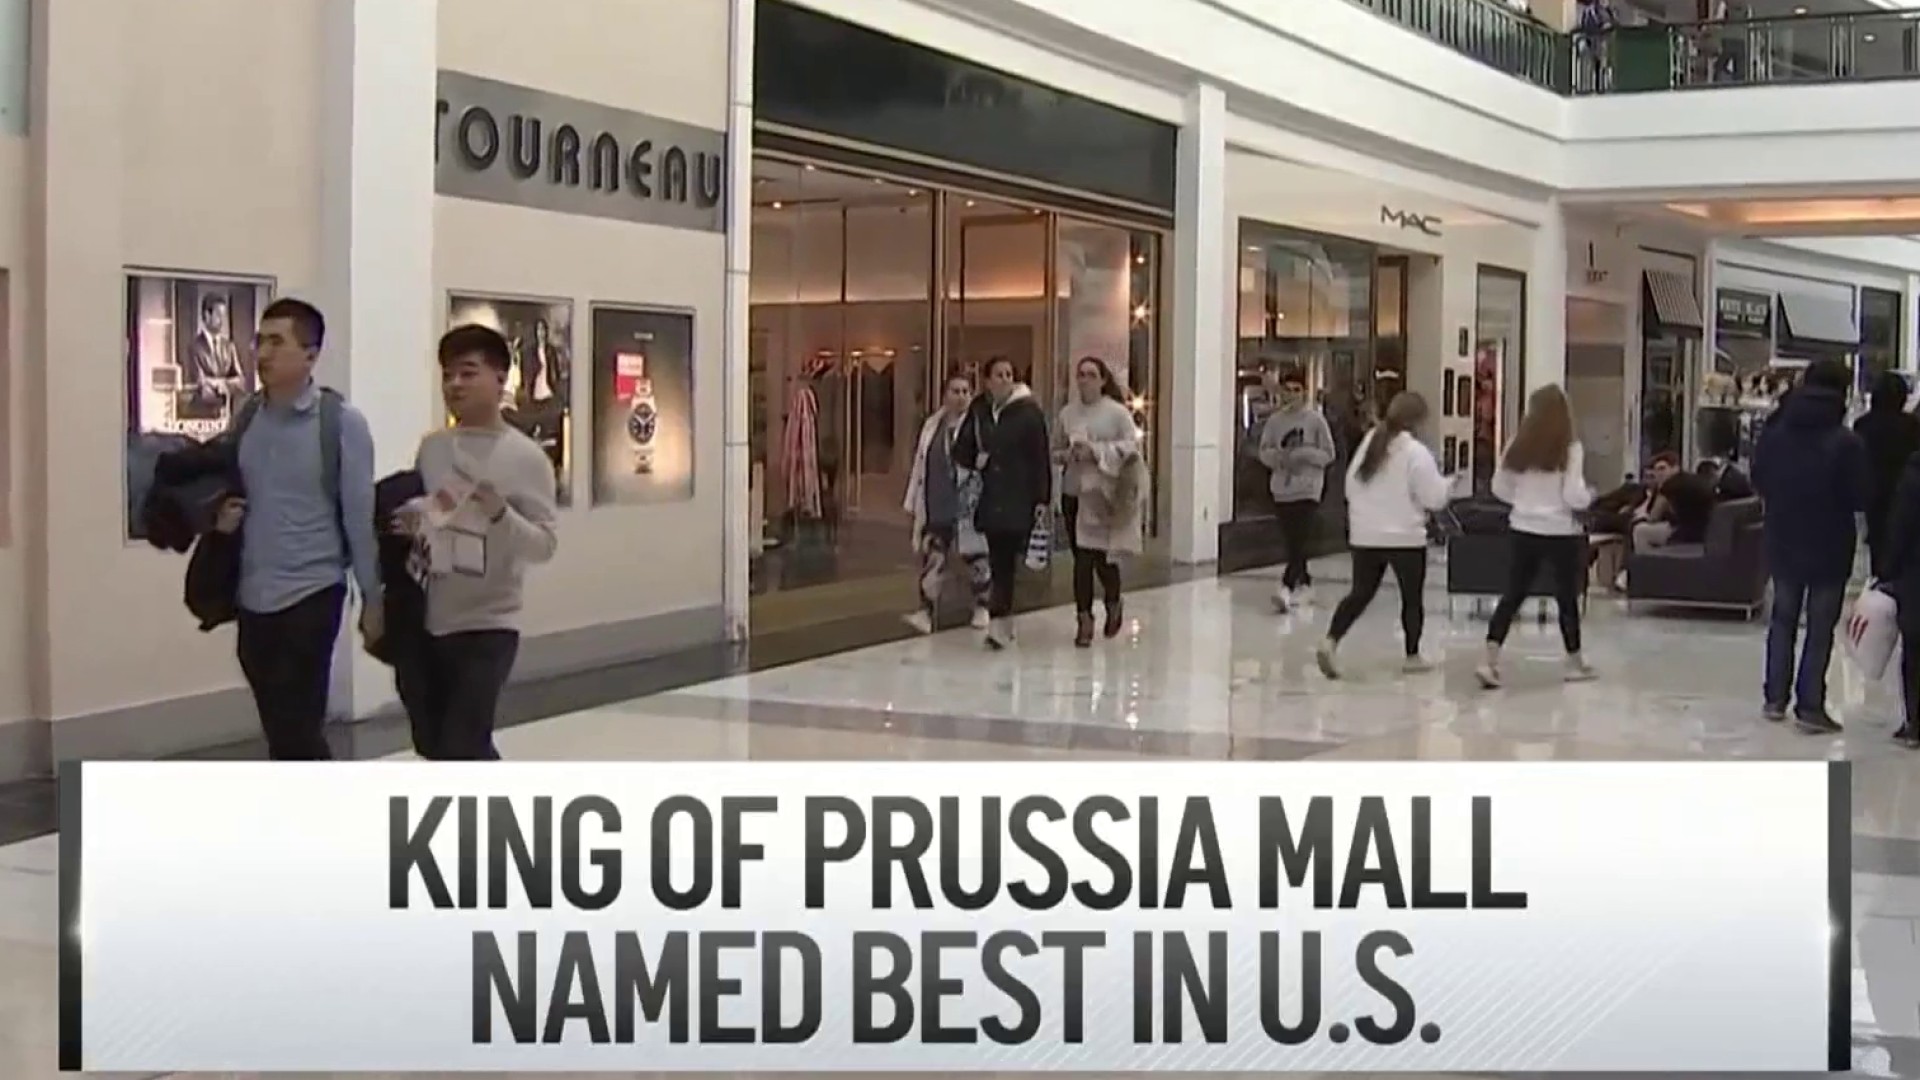 King of Prussia Mall - King of Prussia, PA